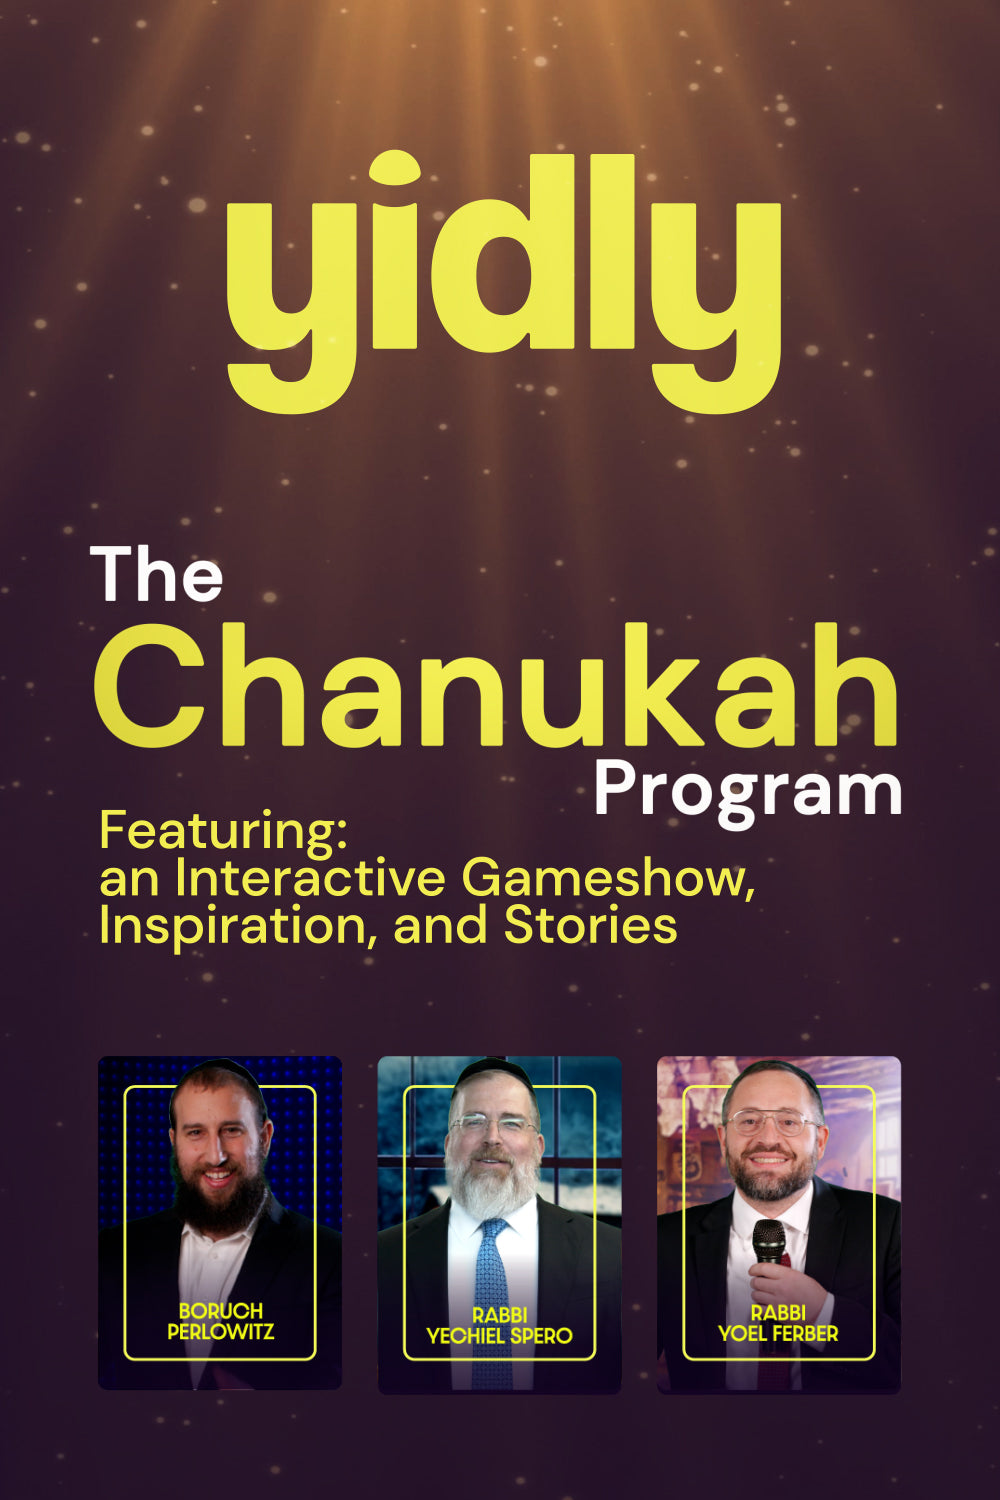 Yidly - The Chanukah Program (Interactive Video)